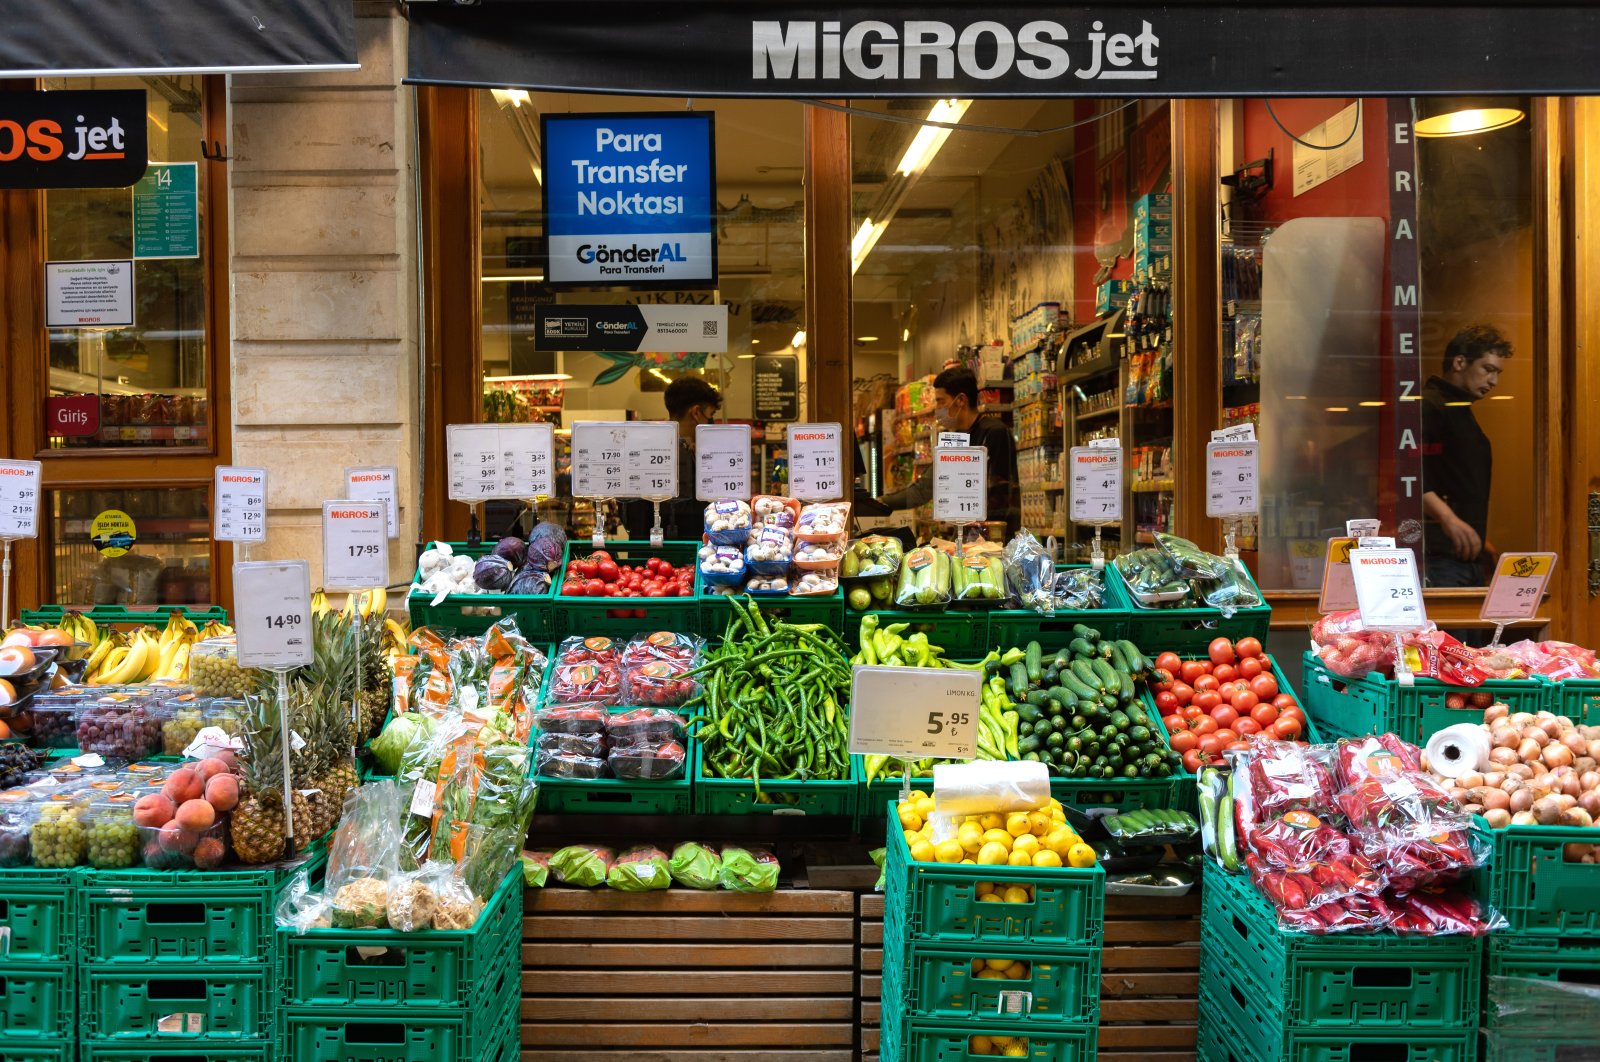 Fruit and Vegetables for sale outside Migros Jet Supermarket in Istanbul, Turkey. (Photo by John Wreford / SOPA Images / Sipa USA)